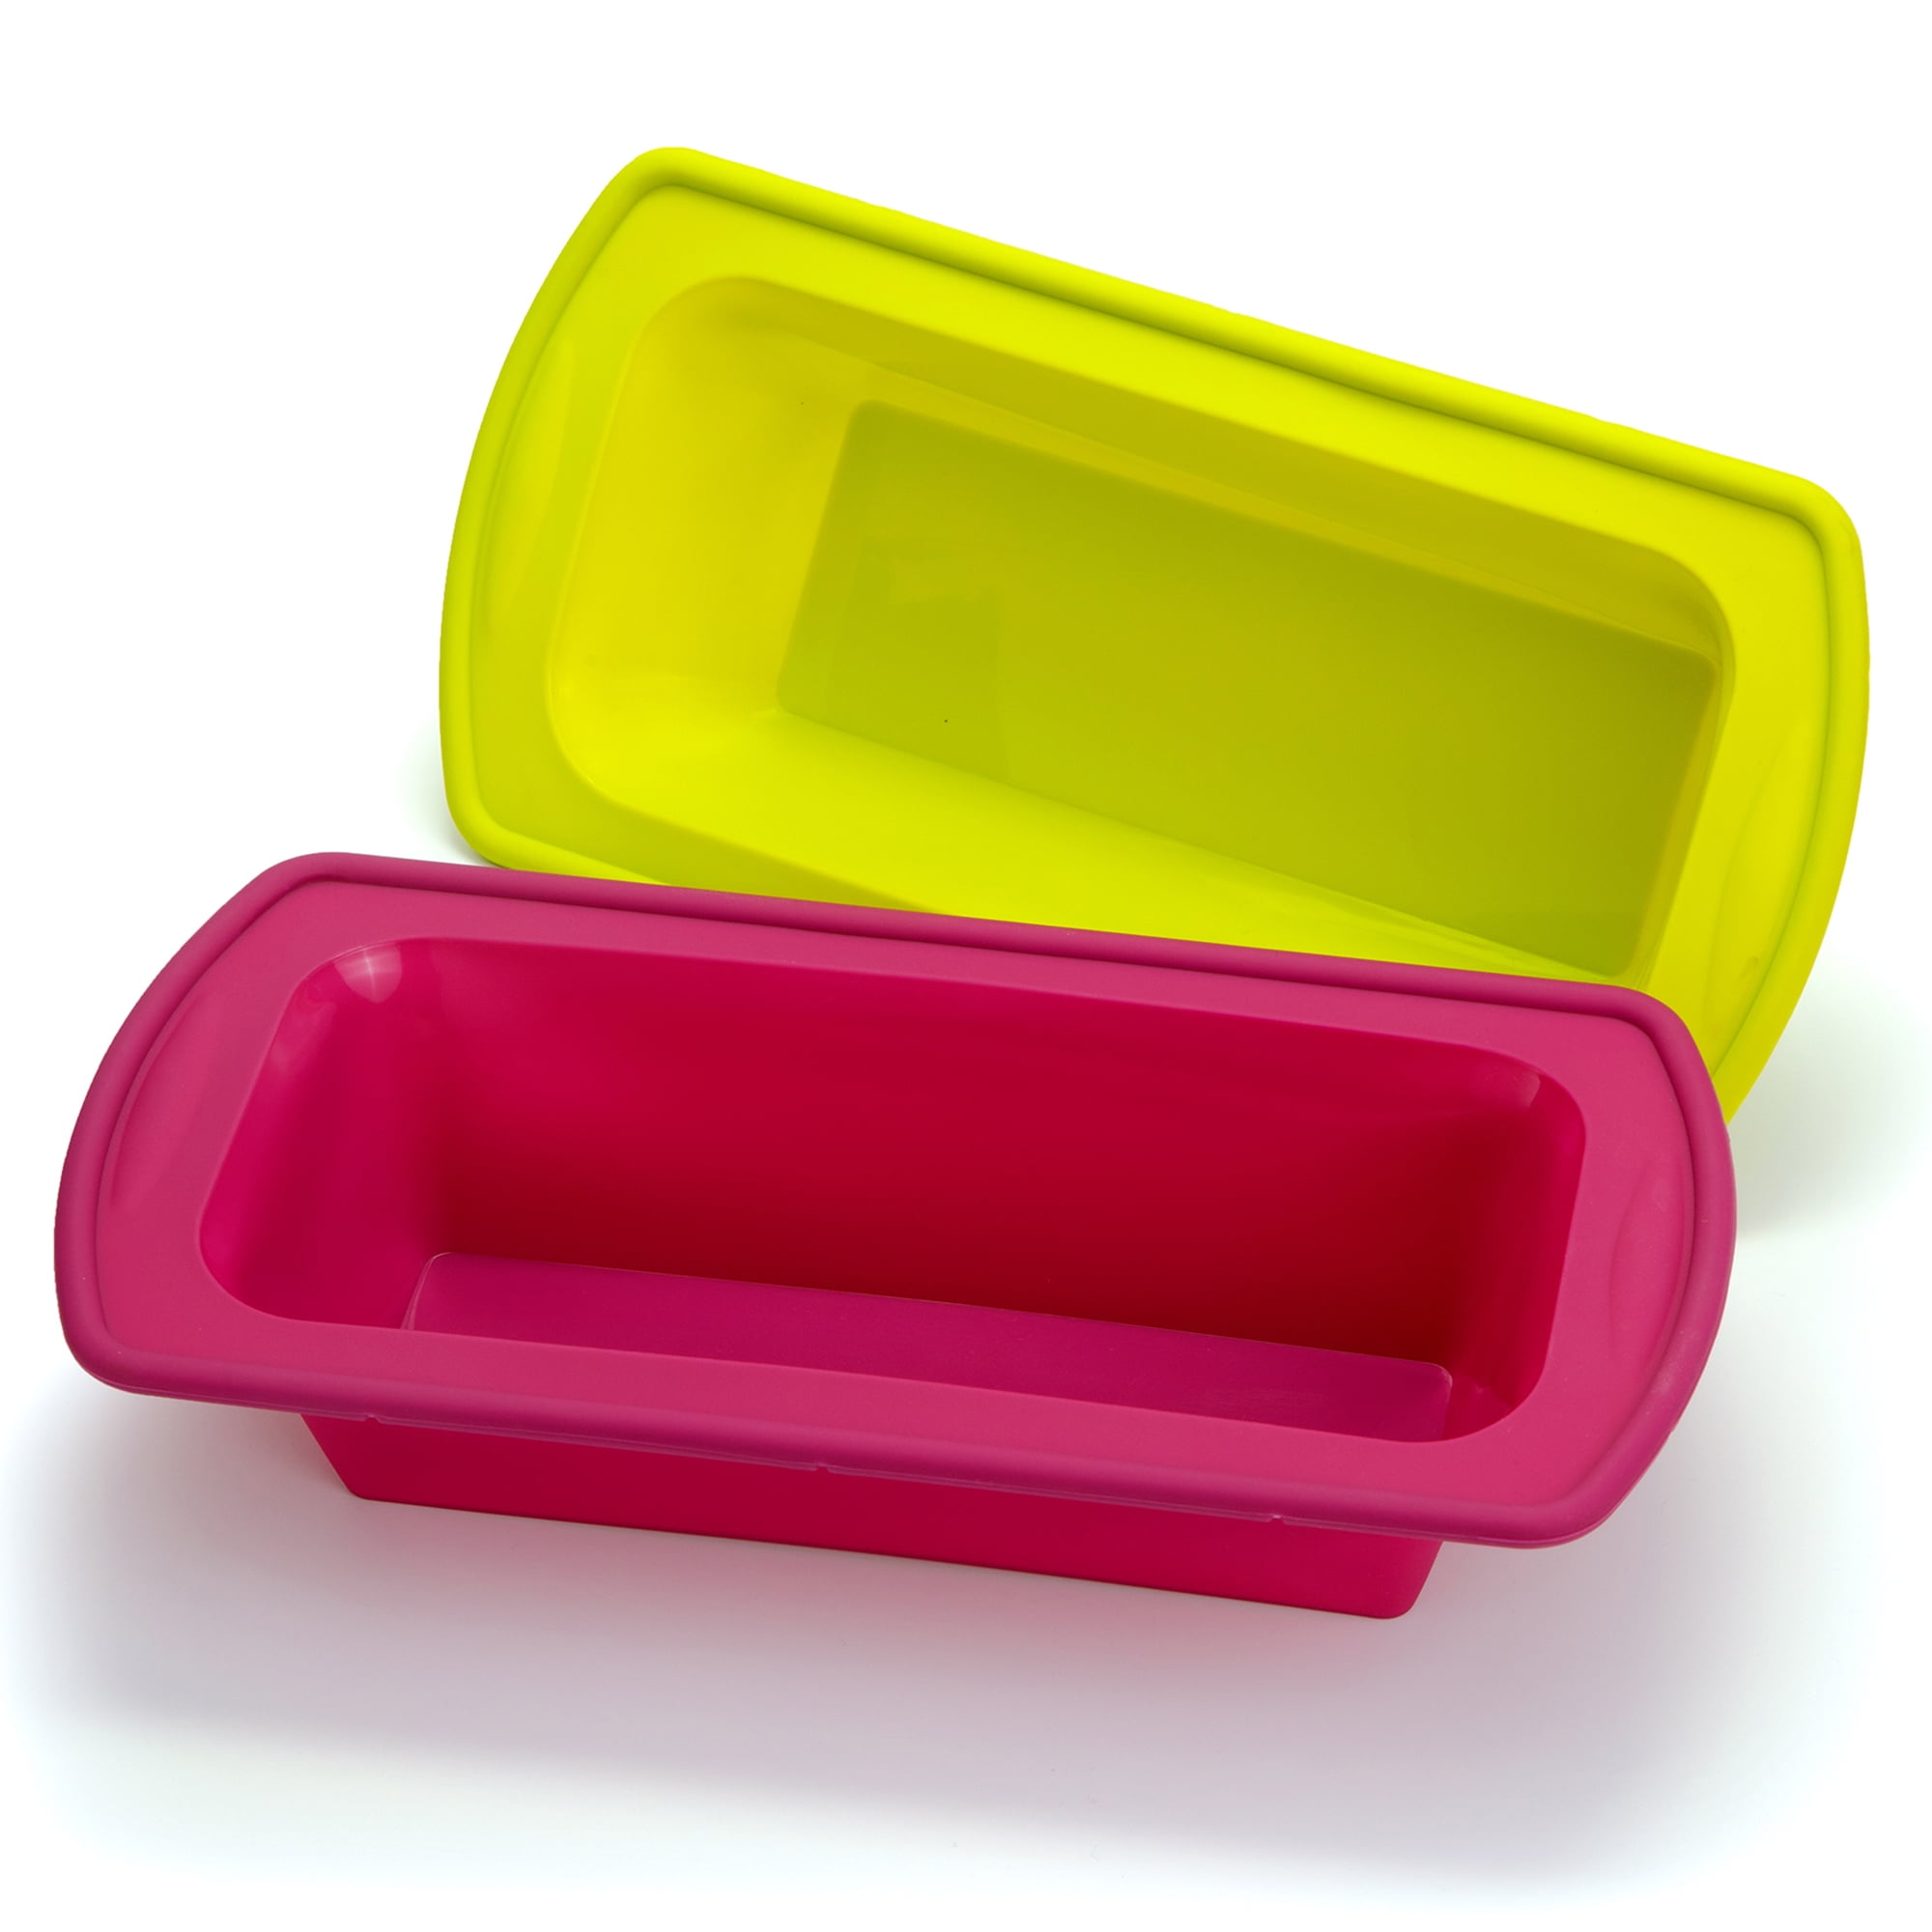 NOGIS Silicone Bread and Loaf Pans - Set of 2 - Non-Stick Silicone